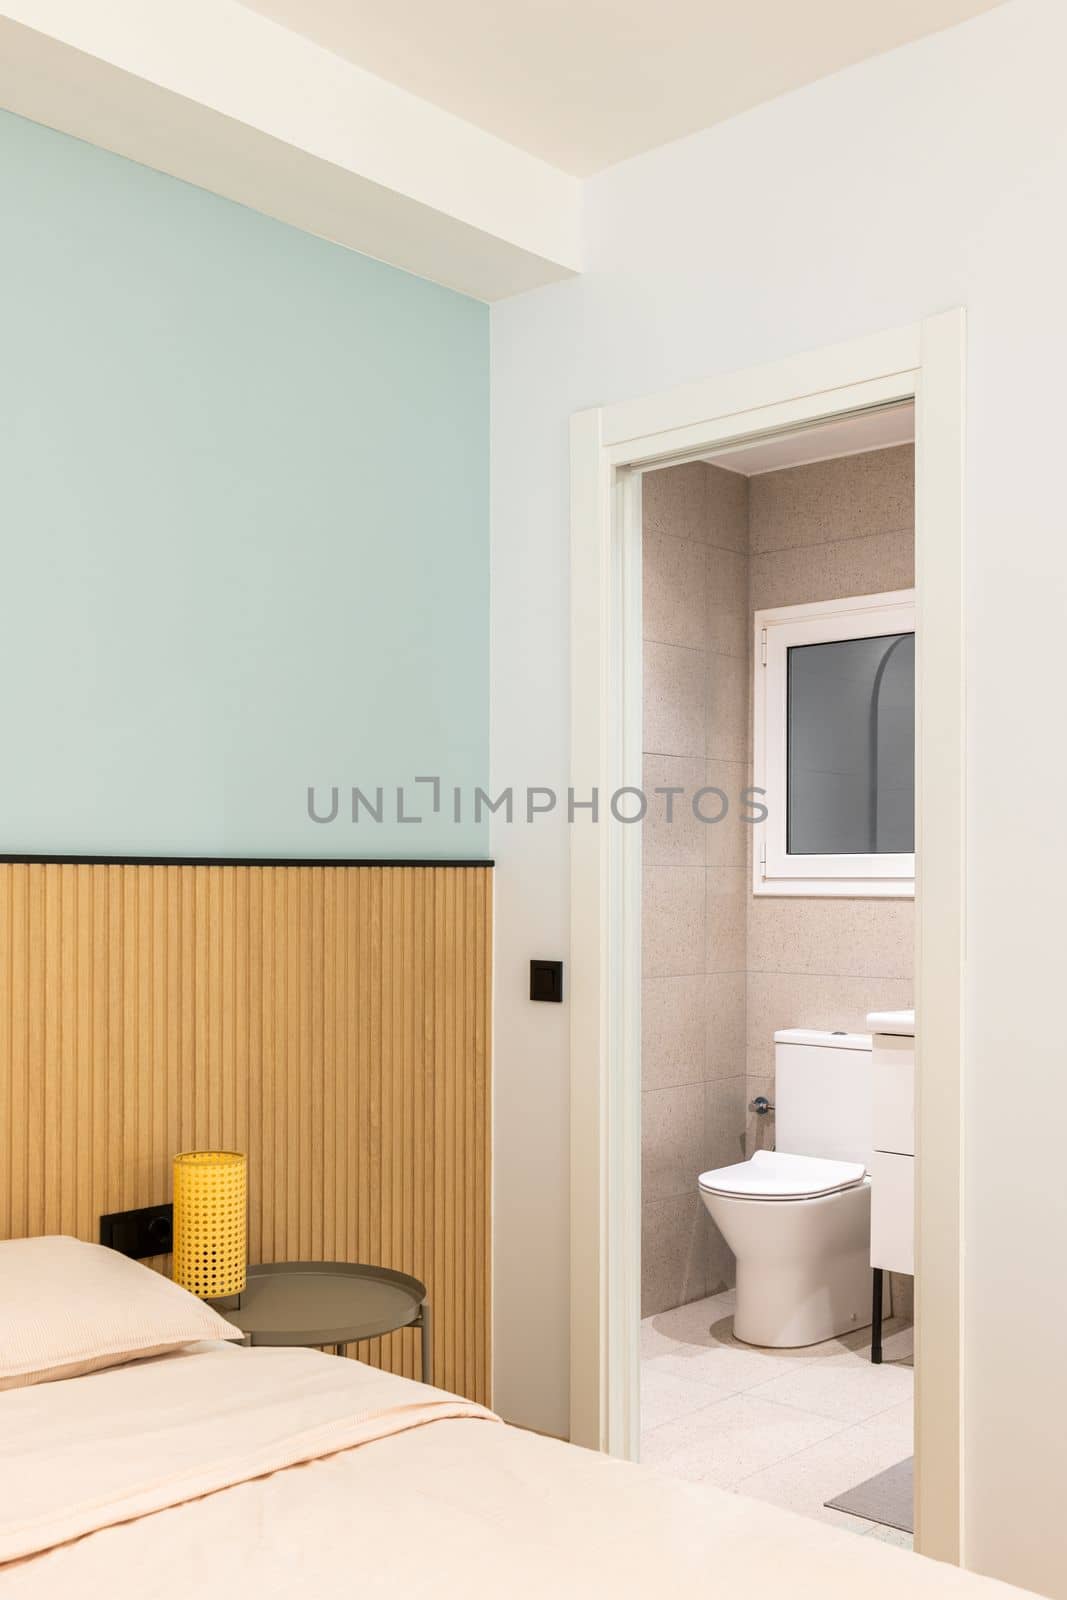 Open door to toilet room from cozy bedroom. Through doorway you can see white toilet bowl, tiled walls and floors, sink edge on black-legged vanity, and frosted plastic window. by apavlin